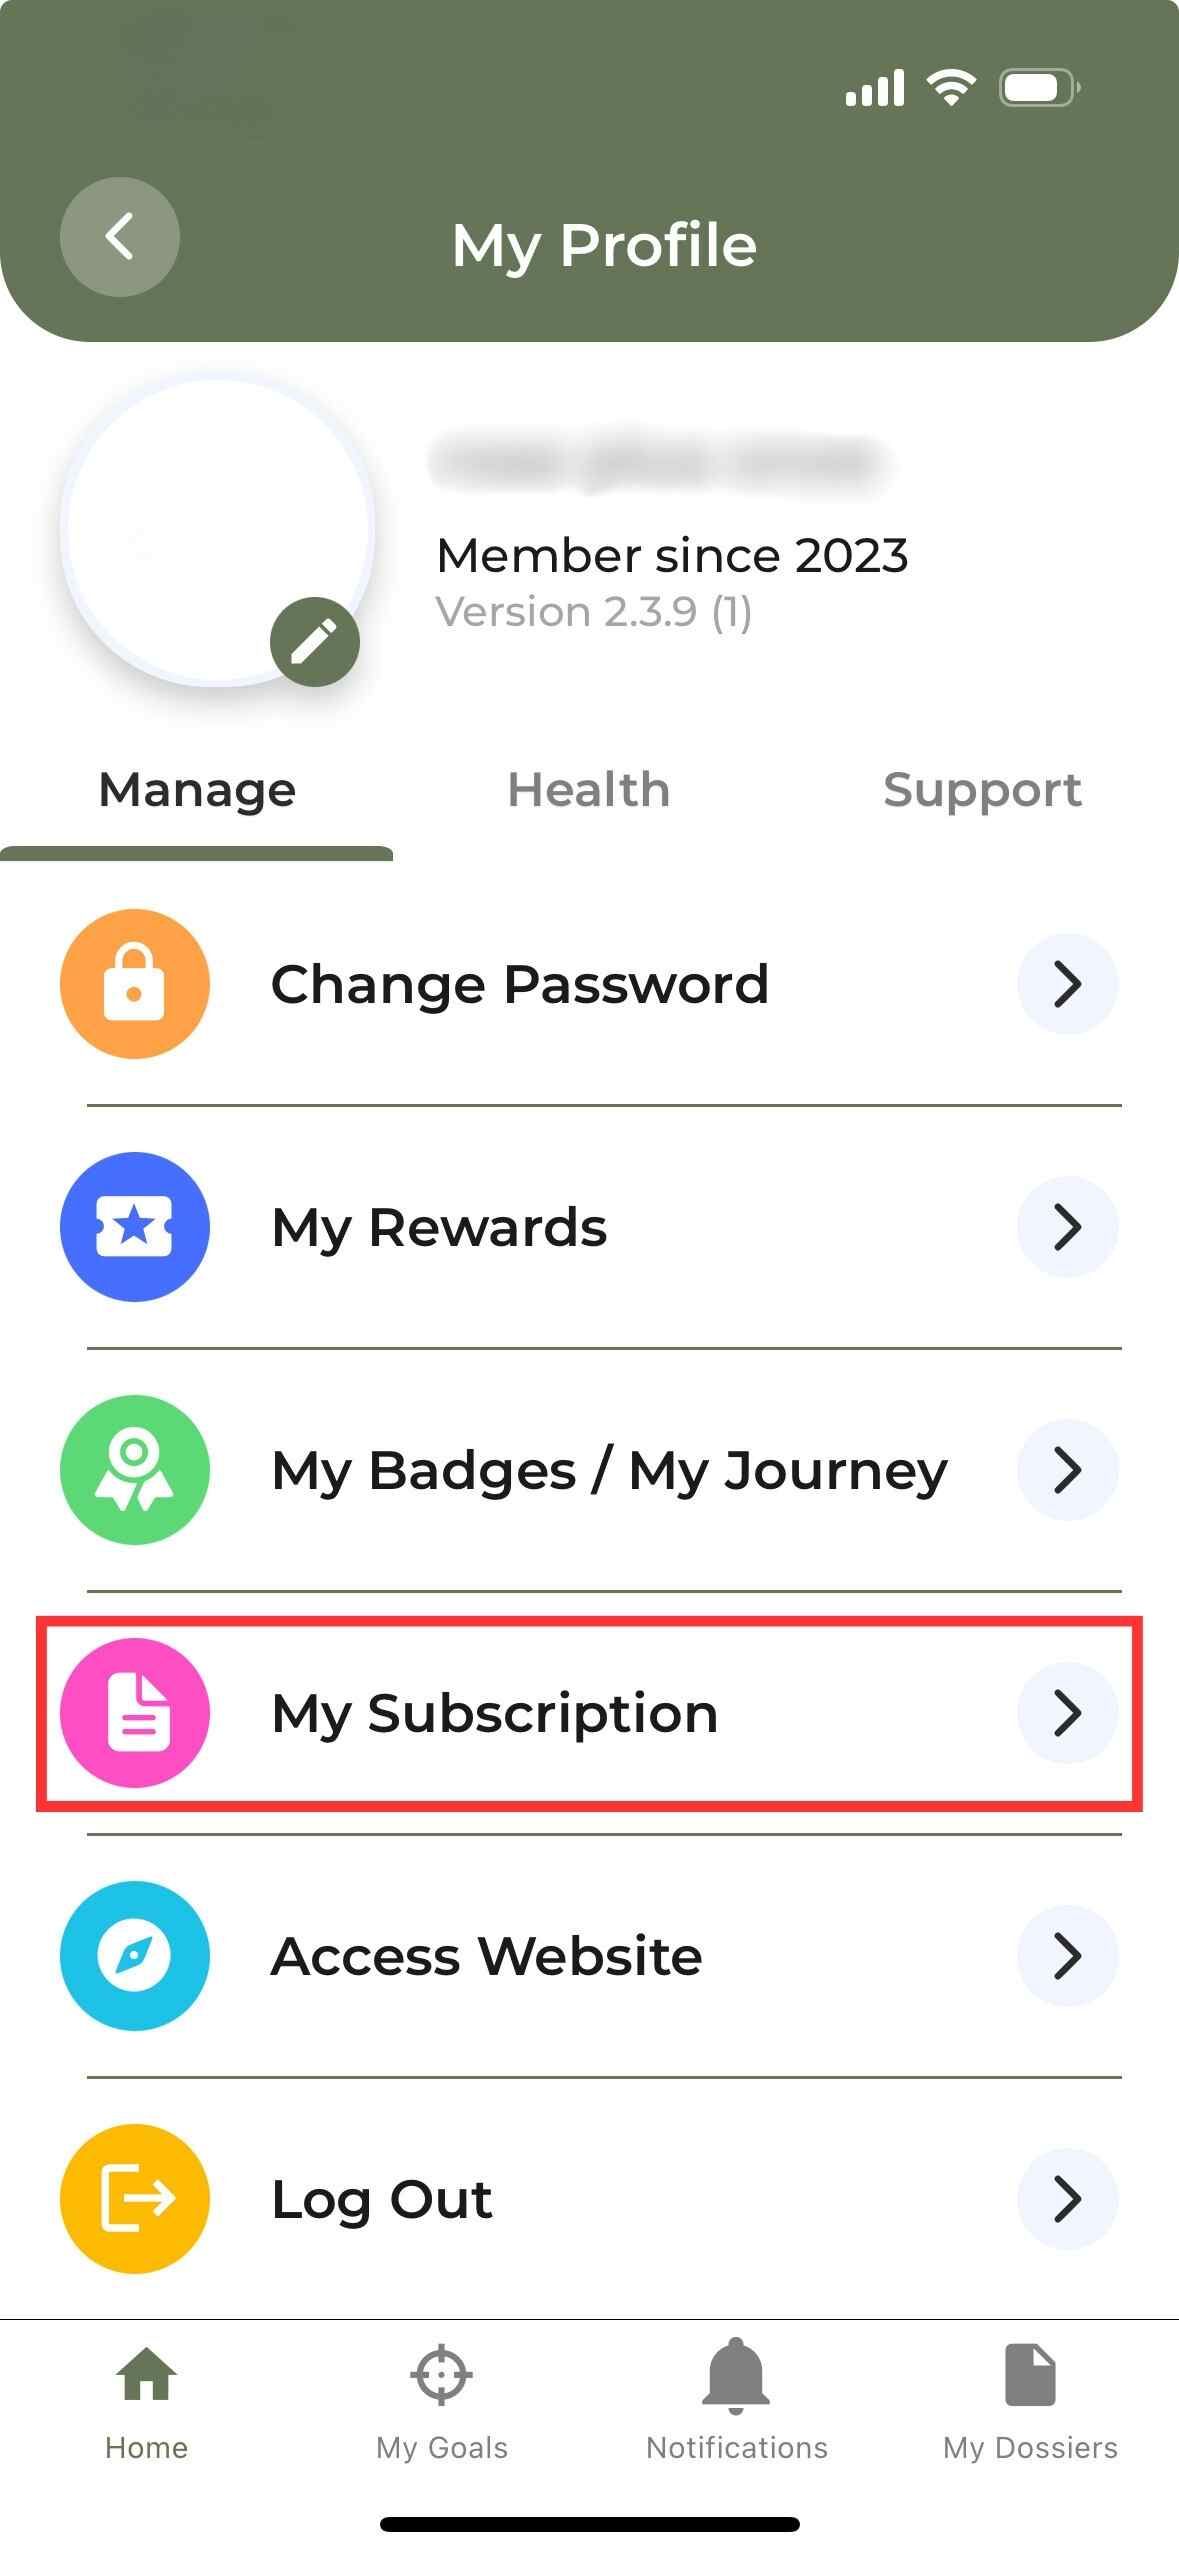 How to modify my subscription?